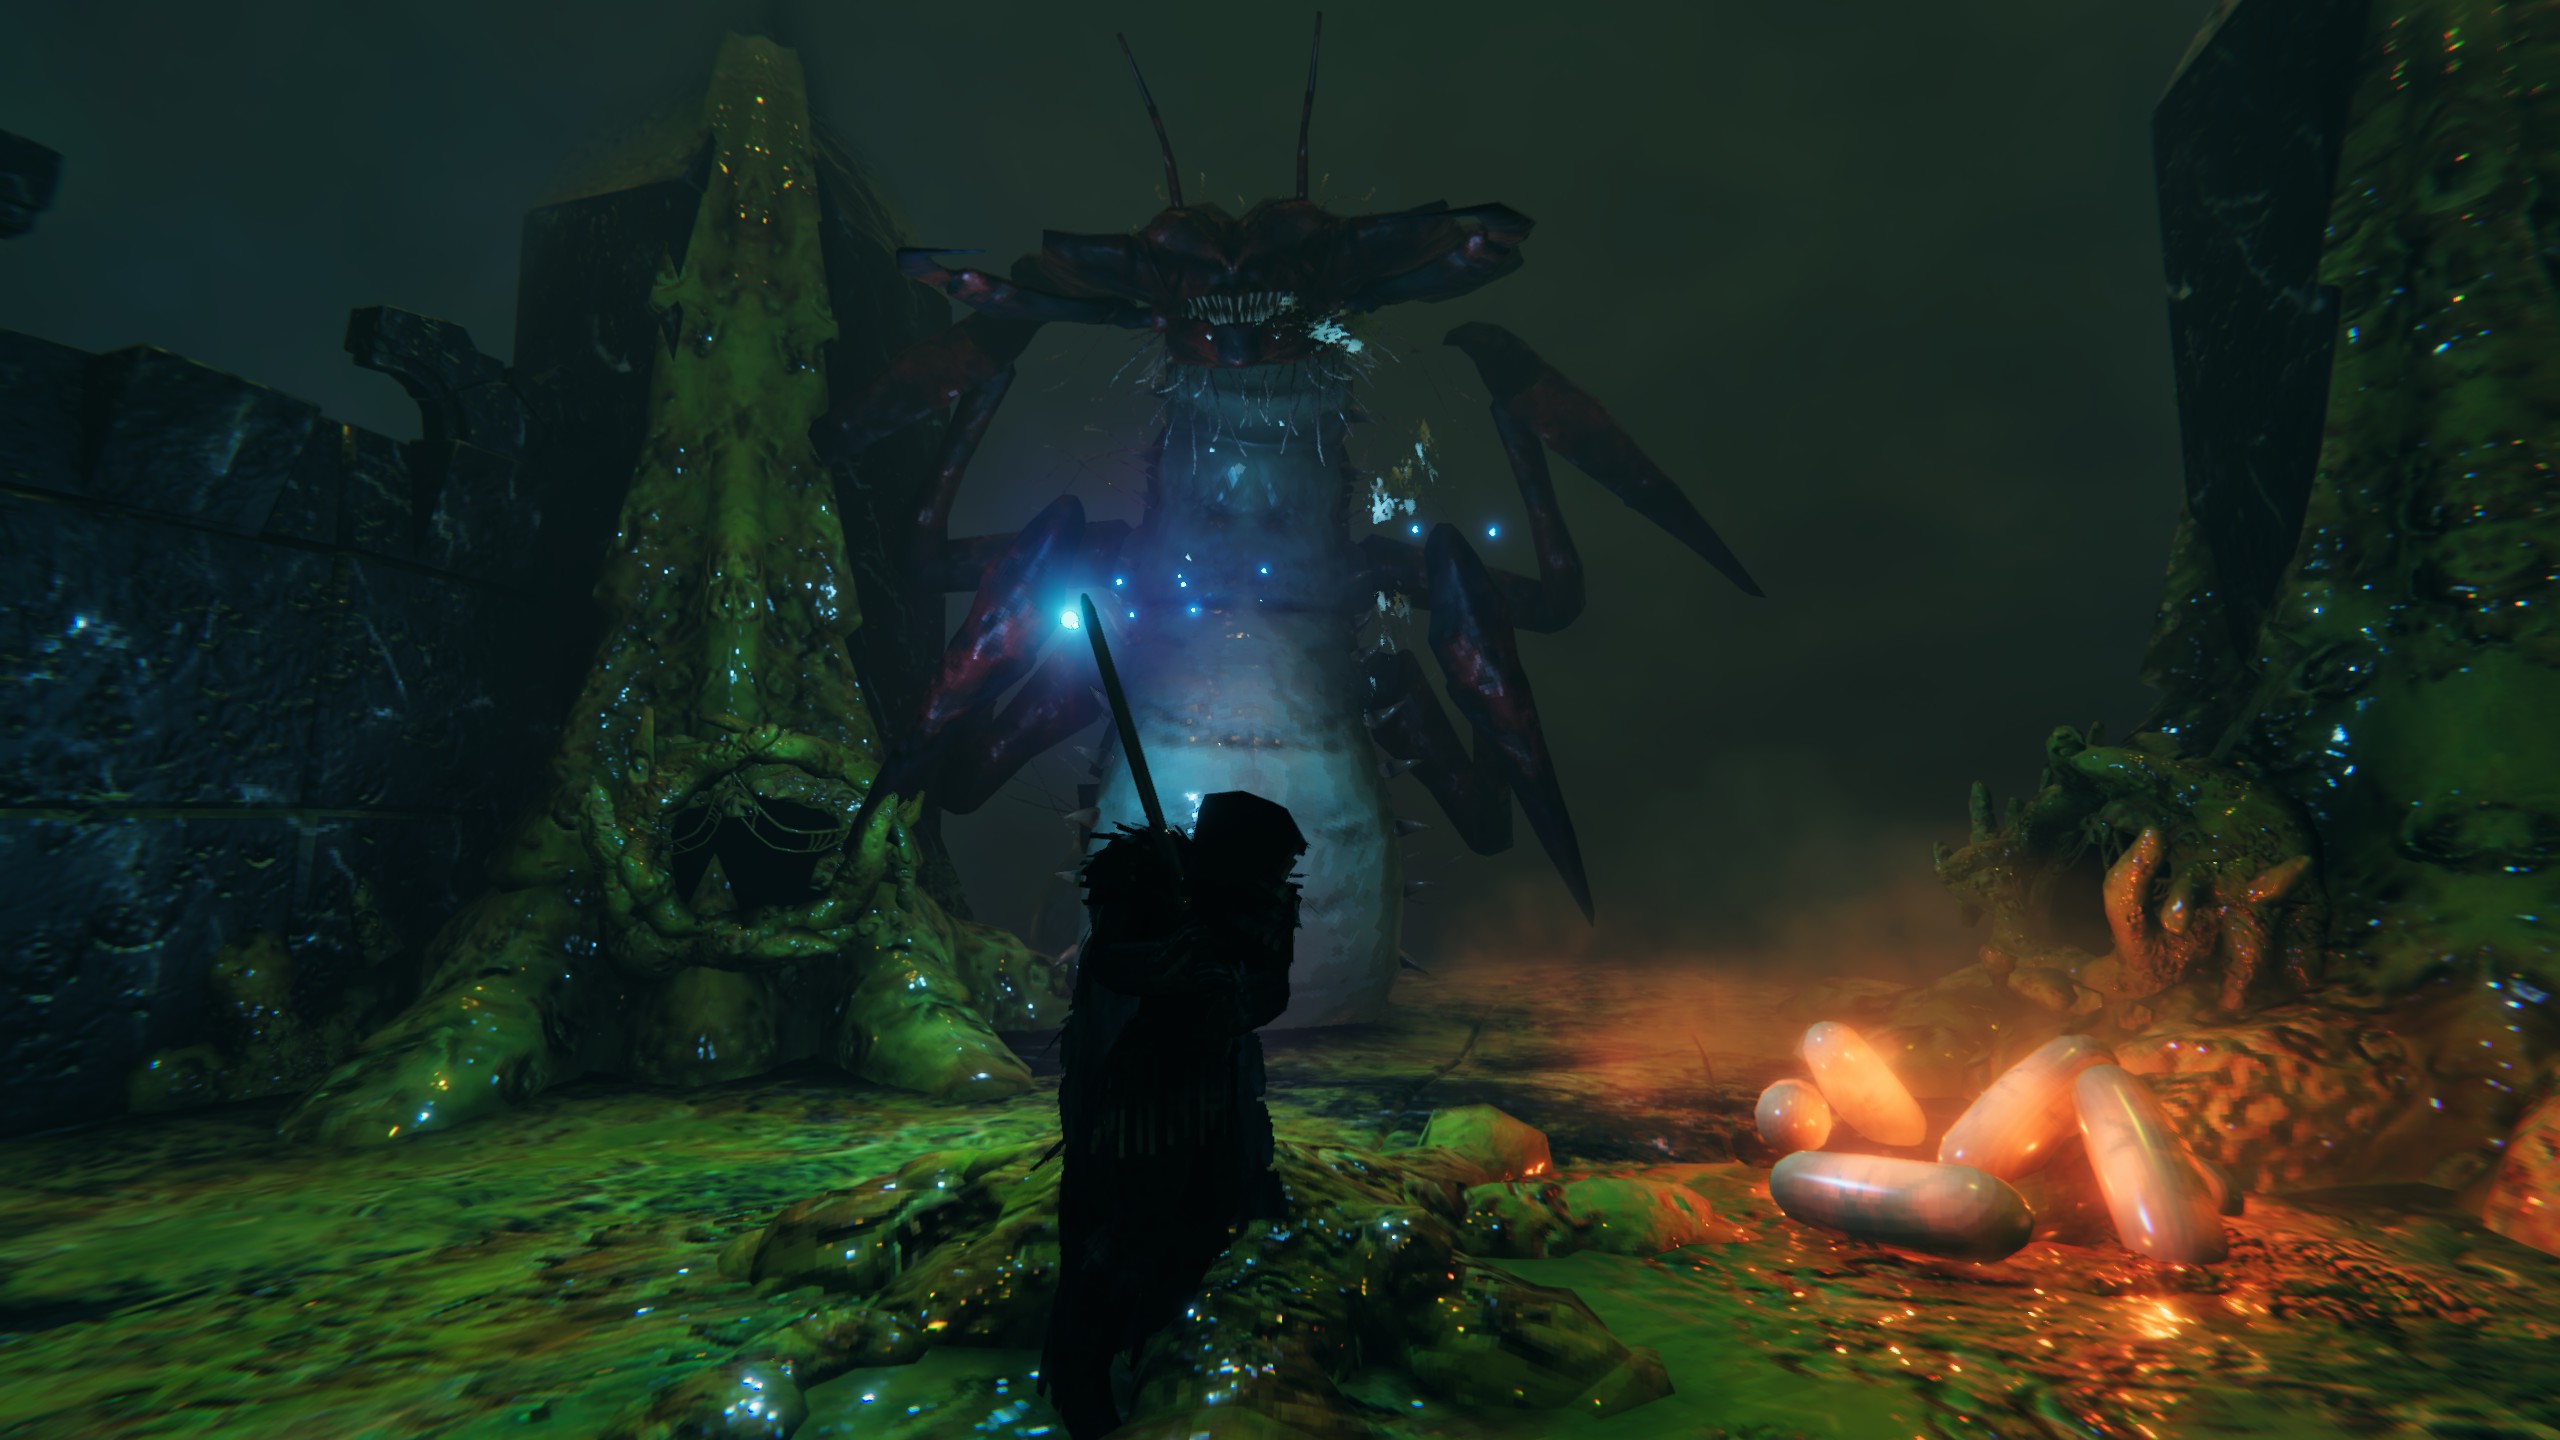 Valheim Mistlands Queen boss - a giant insect with four limbs and antennae stands in front of the player in a dark hive.